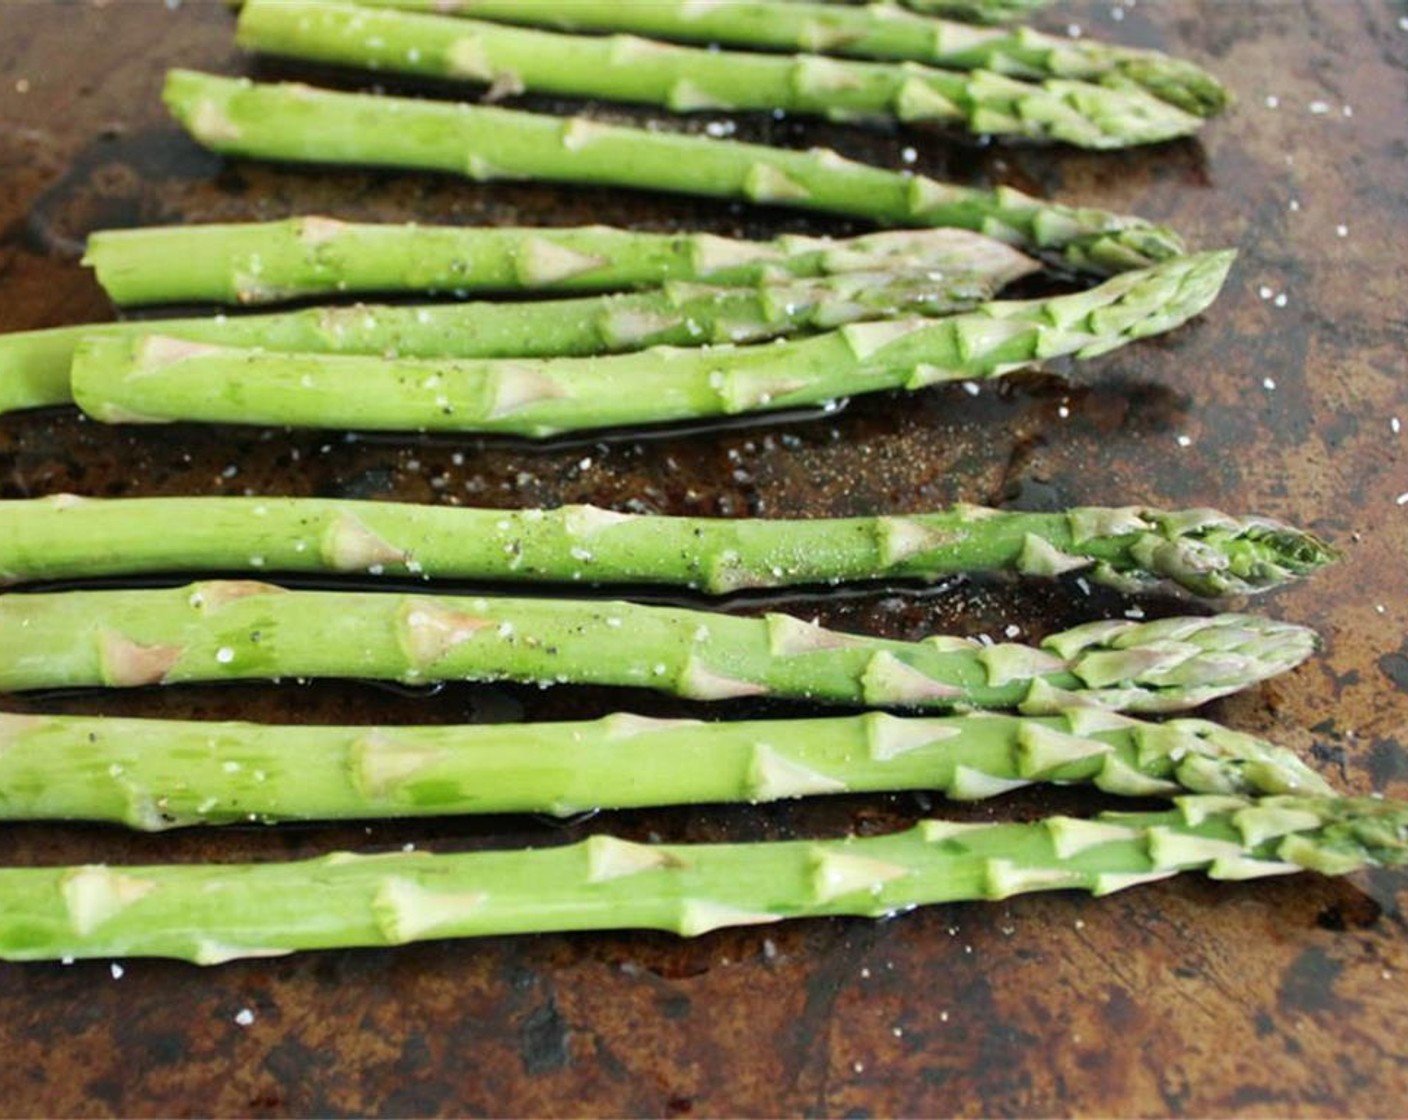 step 6 Place the asparagus on a rimmed baking sheet and drizzle with Extra-Virgin Olive Oil (1 Tbsp). Season with a little Salt (to taste) and Freshly Ground Black Pepper (to taste), and toss to coat.